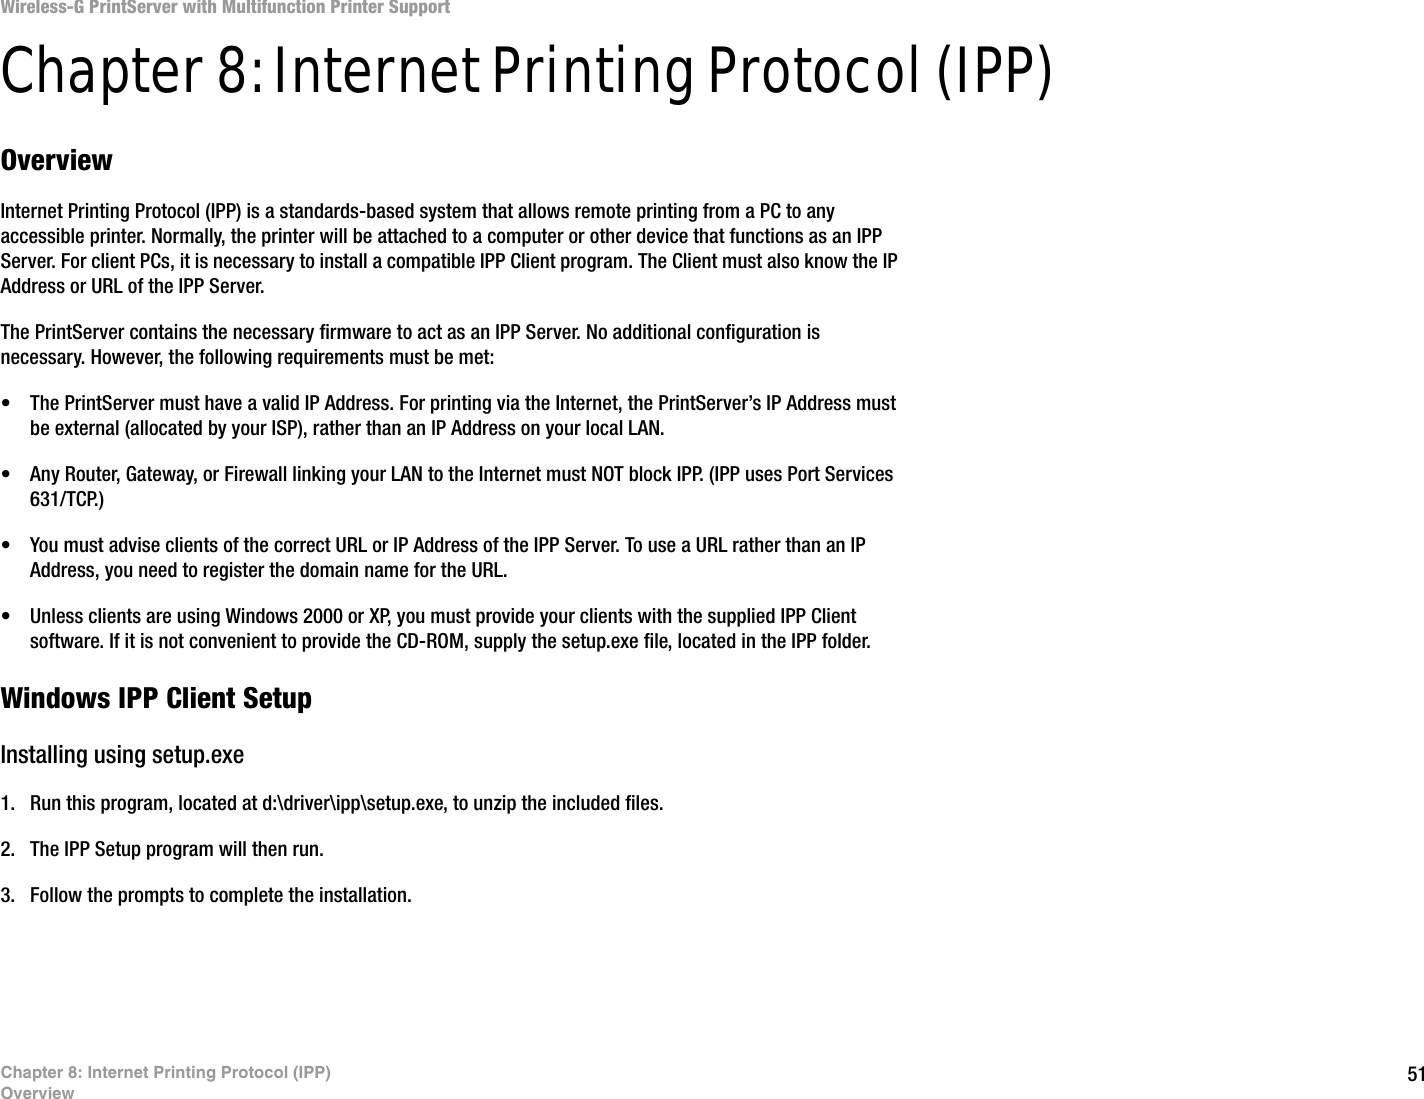 51Chapter 8: Internet Printing Protocol (IPP)OverviewWireless-G PrintServer with Multifunction Printer SupportChapter 8: Internet Printing Protocol (IPP)OverviewInternet Printing Protocol (IPP) is a standards-based system that allows remote printing from a PC to any accessible printer. Normally, the printer will be attached to a computer or other device that functions as an IPP Server. For client PCs, it is necessary to install a compatible IPP Client program. The Client must also know the IP Address or URL of the IPP Server.The PrintServer contains the necessary firmware to act as an IPP Server. No additional configuration is necessary. However, the following requirements must be met:• The PrintServer must have a valid IP Address. For printing via the Internet, the PrintServer’s IP Address must be external (allocated by your ISP), rather than an IP Address on your local LAN.• Any Router, Gateway, or Firewall linking your LAN to the Internet must NOT block IPP. (IPP uses Port Services 631/TCP.)• You must advise clients of the correct URL or IP Address of the IPP Server. To use a URL rather than an IP Address, you need to register the domain name for the URL. • Unless clients are using Windows 2000 or XP, you must provide your clients with the supplied IPP Client software. If it is not convenient to provide the CD-ROM, supply the setup.exe file, located in the IPP folder. Windows IPP Client SetupInstalling using setup.exe1. Run this program, located at d:\driver\ipp\setup.exe, to unzip the included files. 2. The IPP Setup program will then run. 3. Follow the prompts to complete the installation. 